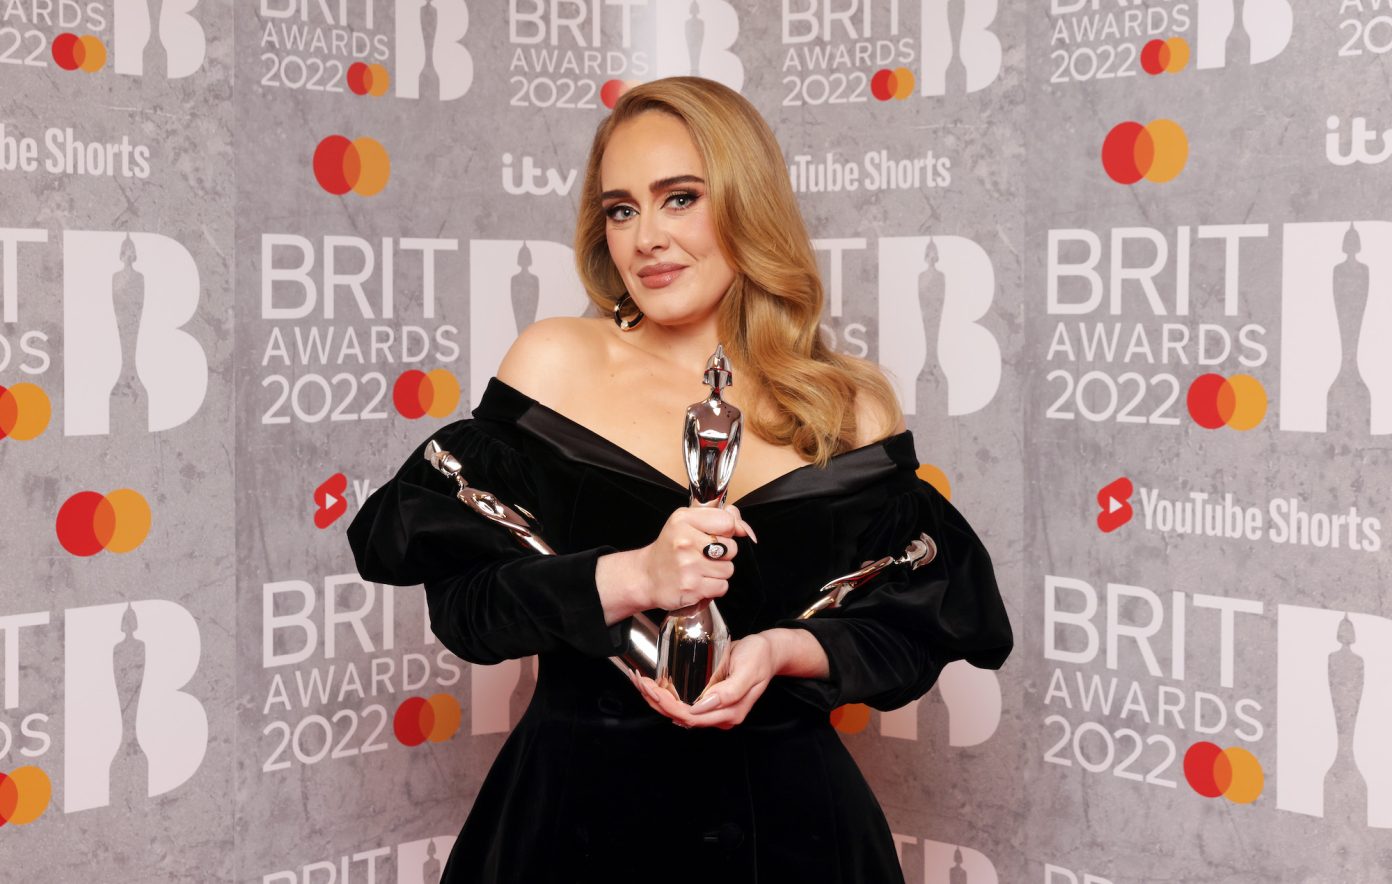 Brit Awards 2022 Winners: Adele, Billie Eilish, Olivia Rodrigo, Dave, And More, Yours Truly, News, August 9, 2022